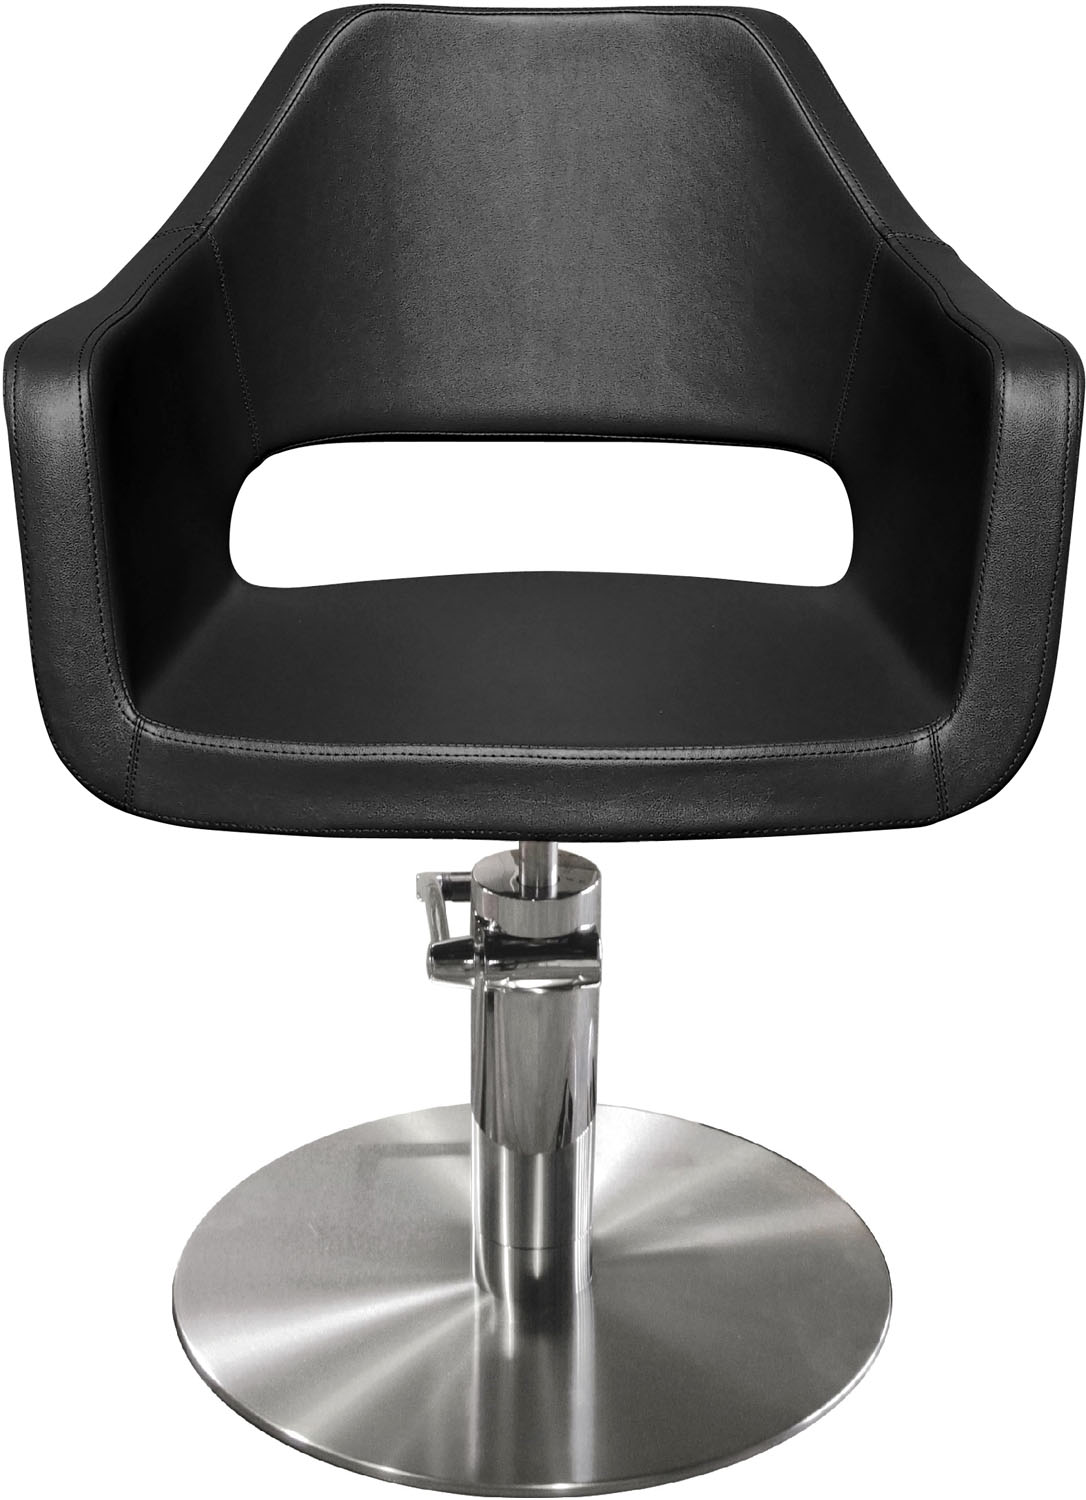  Hairway Styling chair "Neo" Deluxe black 